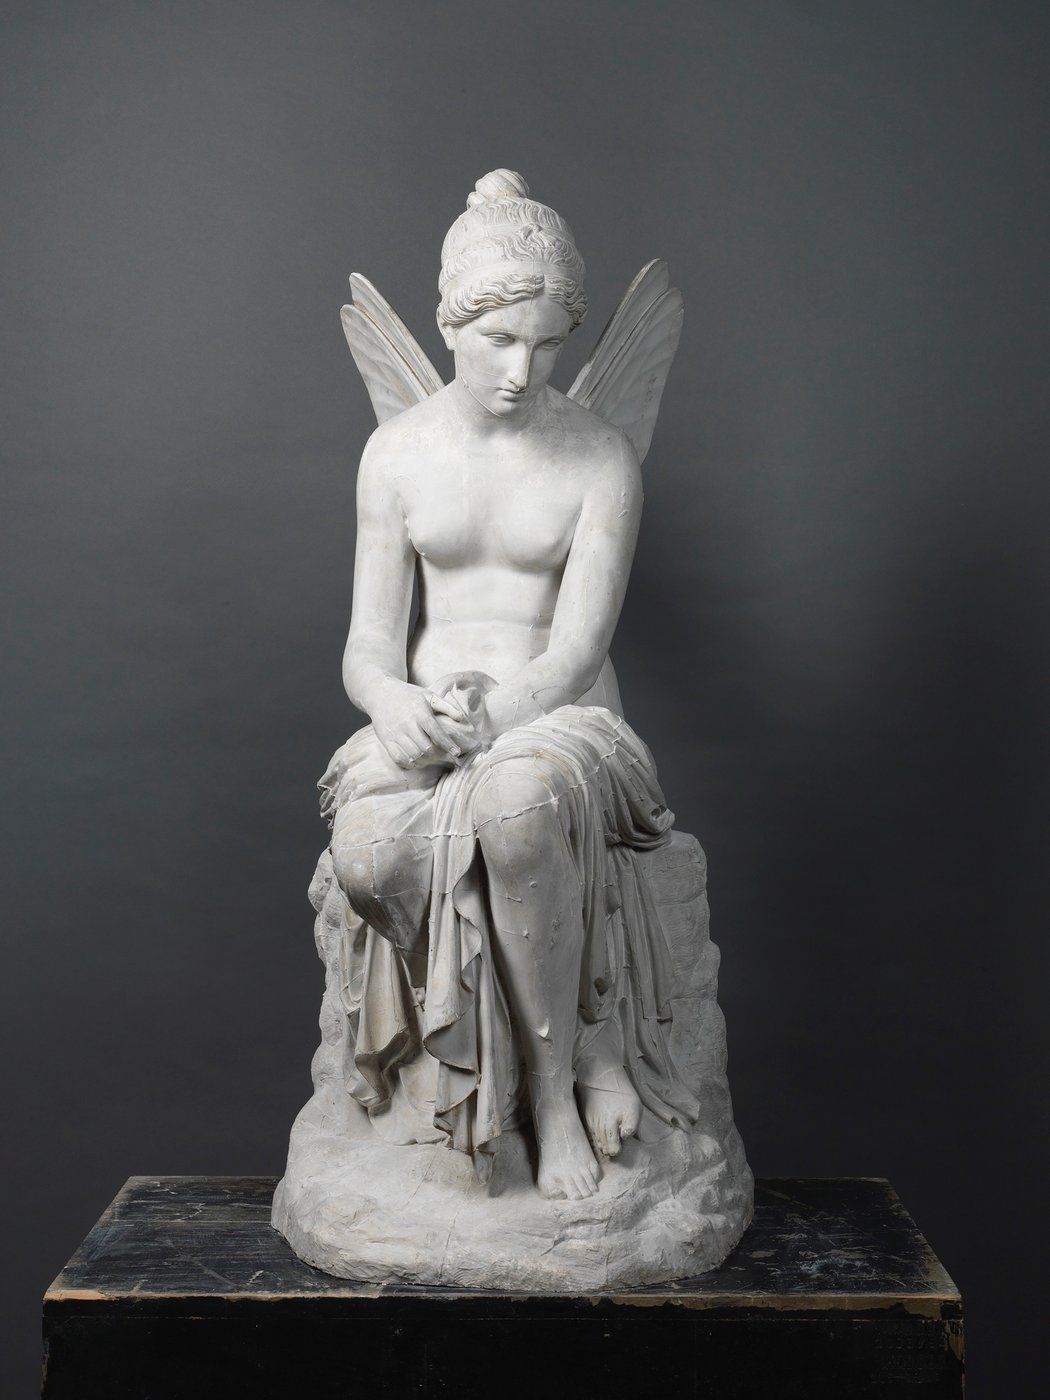 This black-and-white photograph presents a frontal view of the cast of a sculpture entitled Psyche Abandoned. The sculpture consists of a nude seated young woman with delicate wings on her back. 